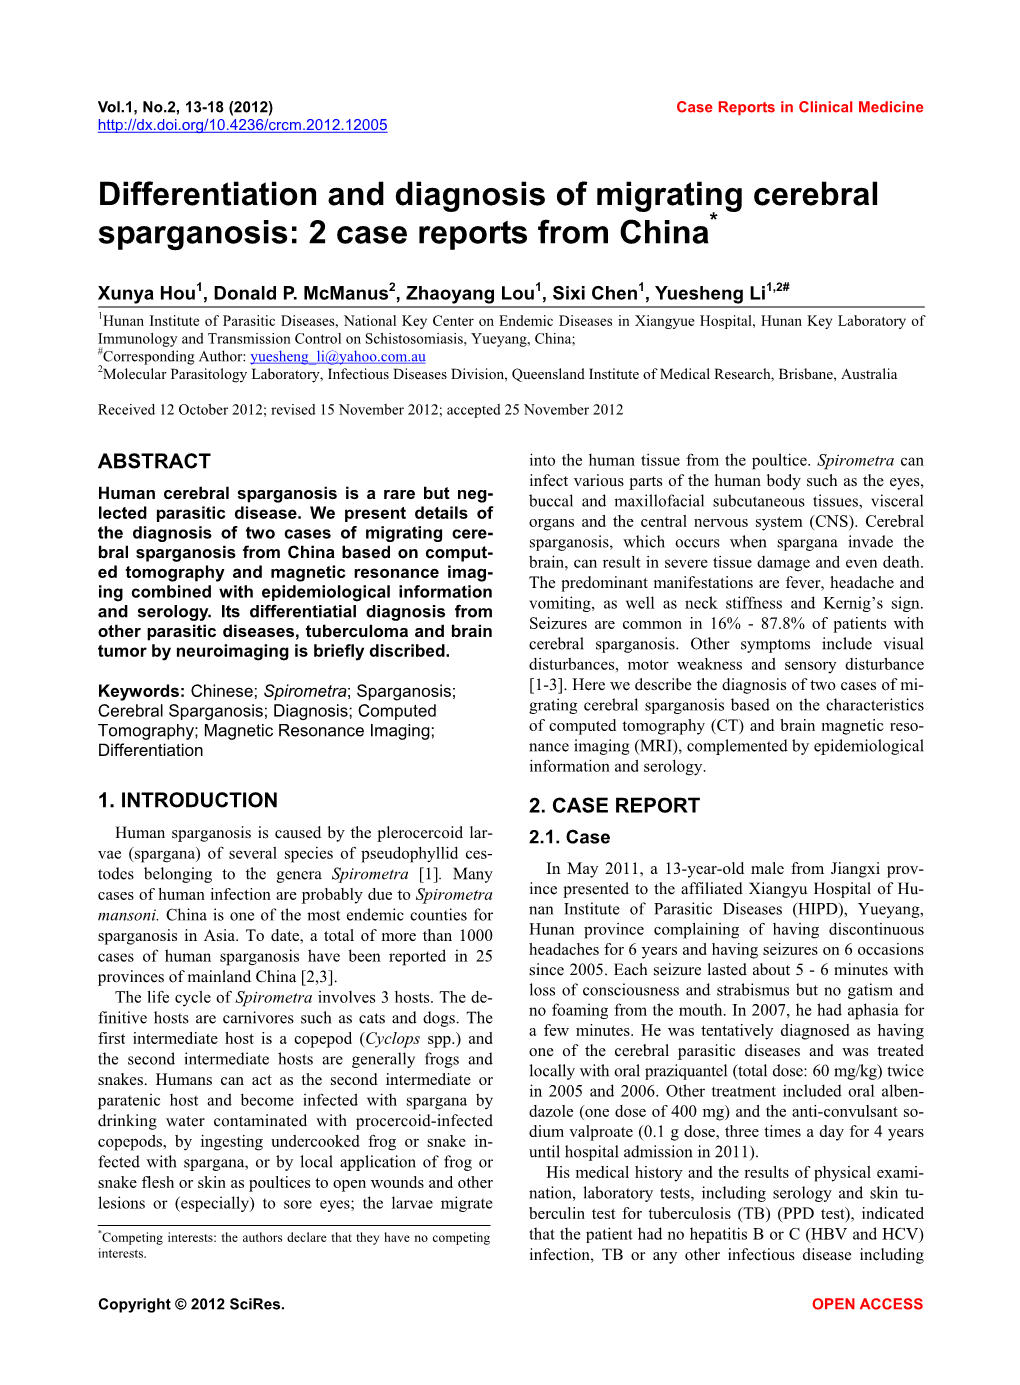 Differentiation and Diagnosis of Migrating Cerebral Sparganosis: 2 Case Reports from China*